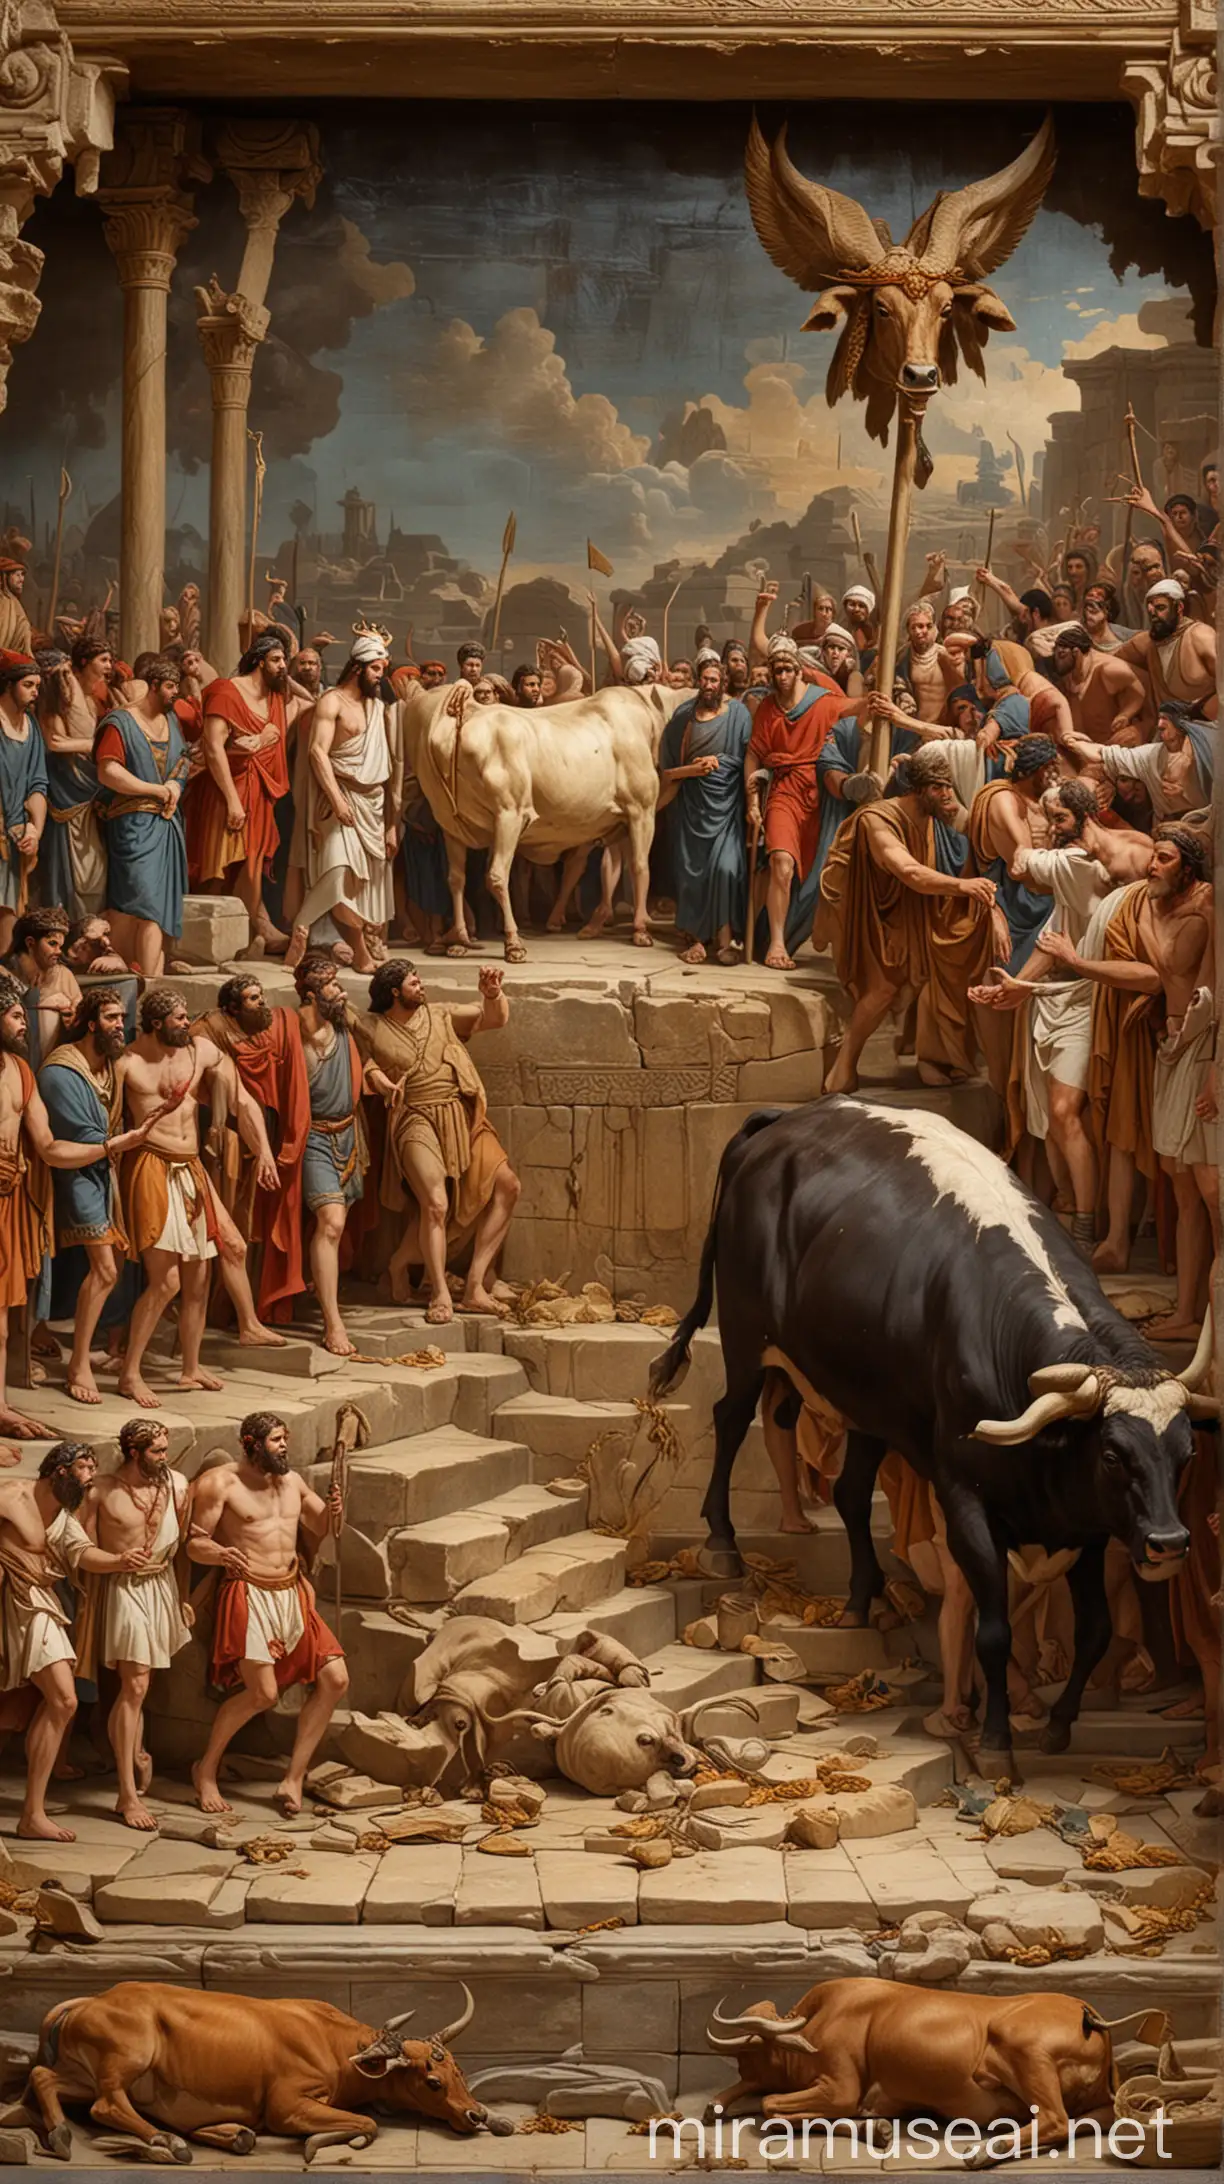 "An ancient ritual scene where King David sacrifices a bull and a fattened calf on an altar. The background shows the men carrying the Ark, halting every six steps."